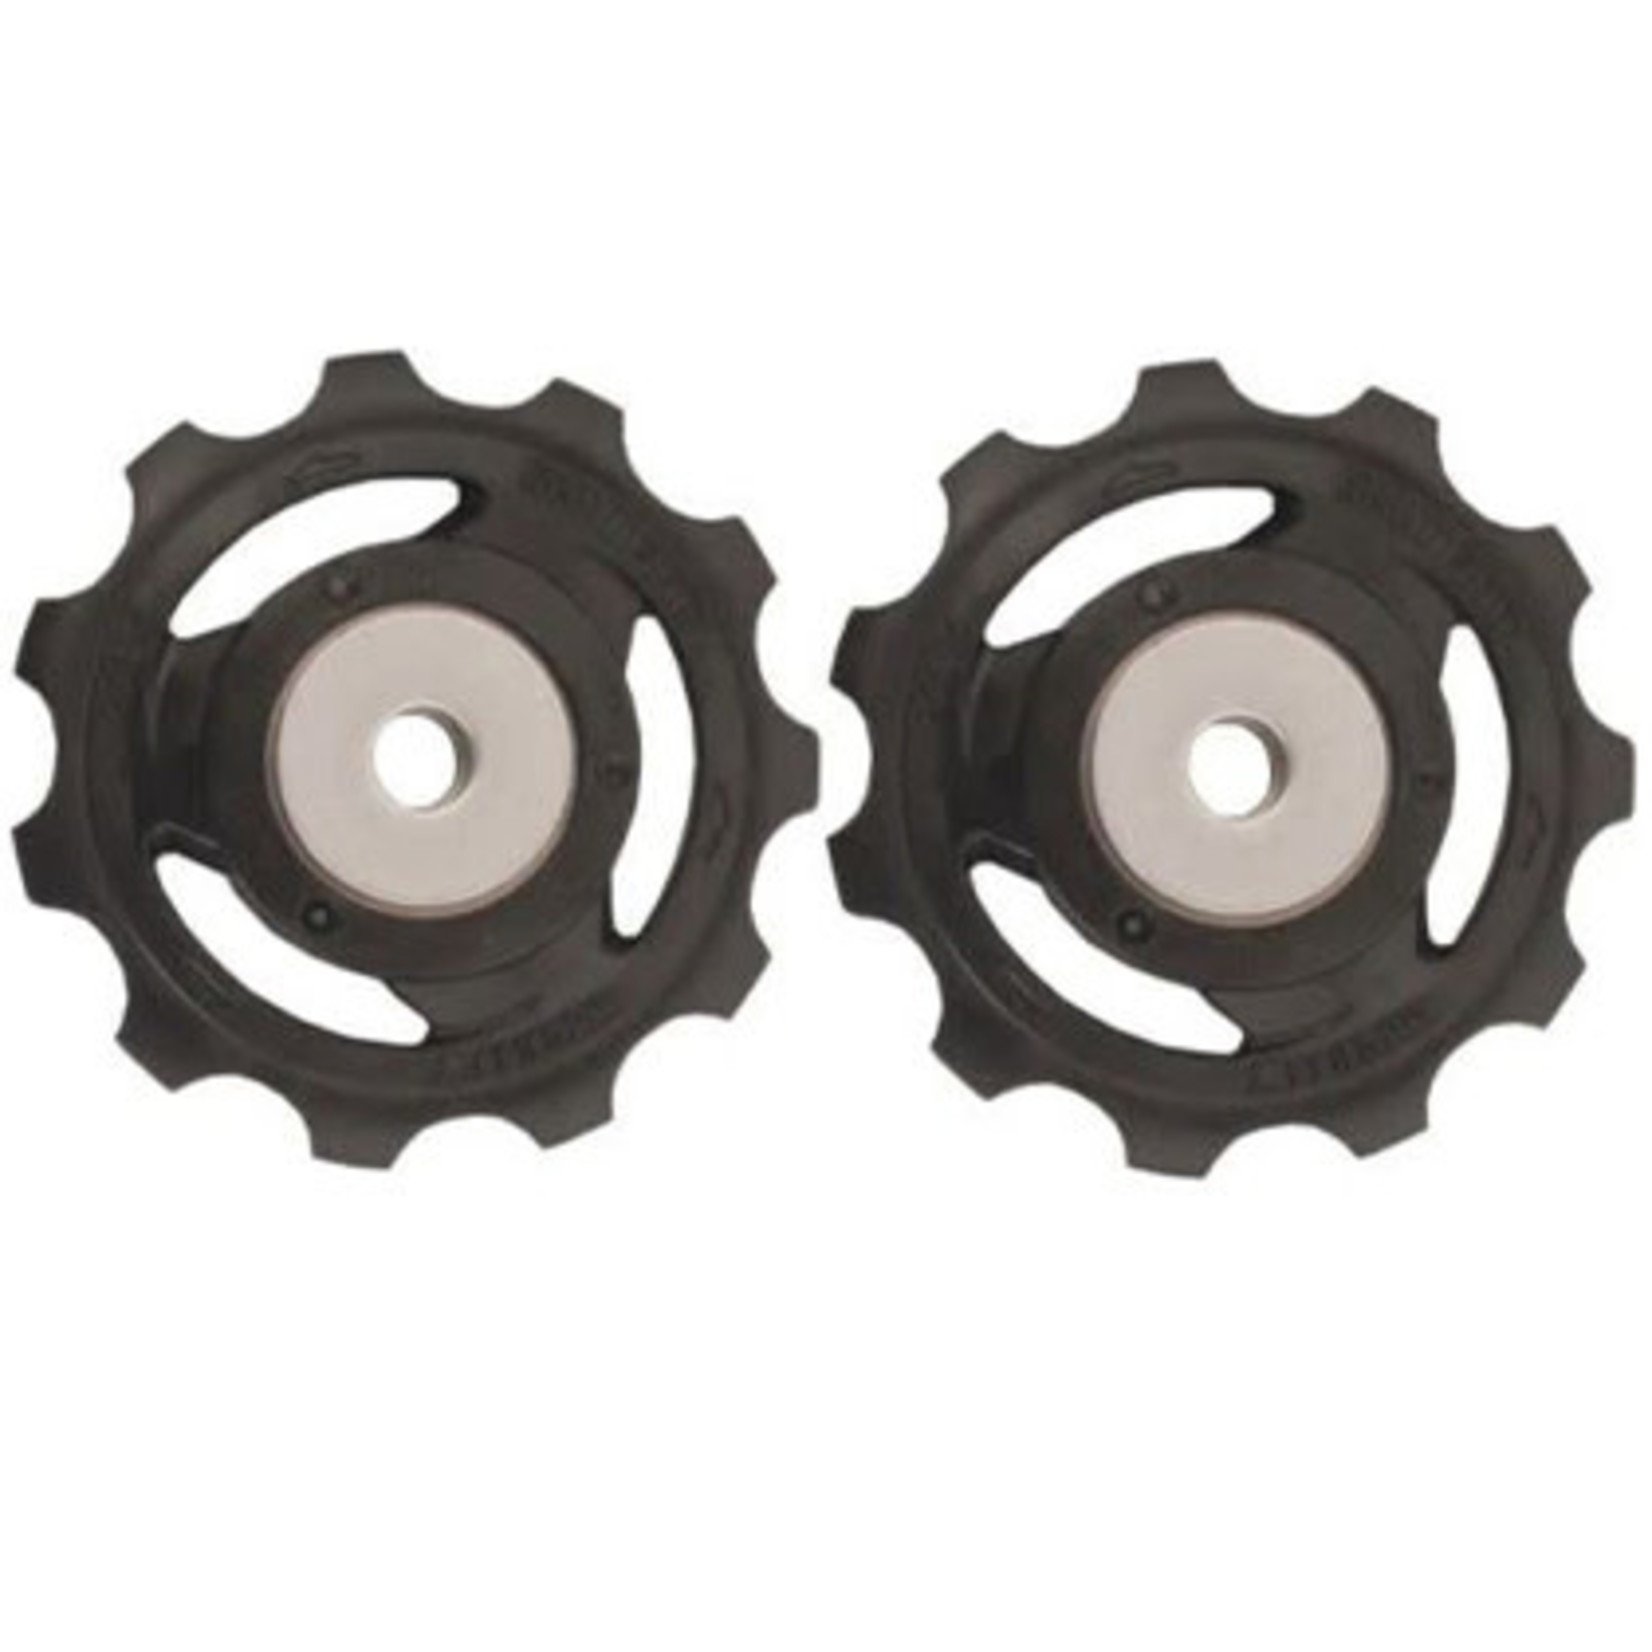 SHIMANO RD-R8000/R8050 TENSION & GUIDE PULLEY SET